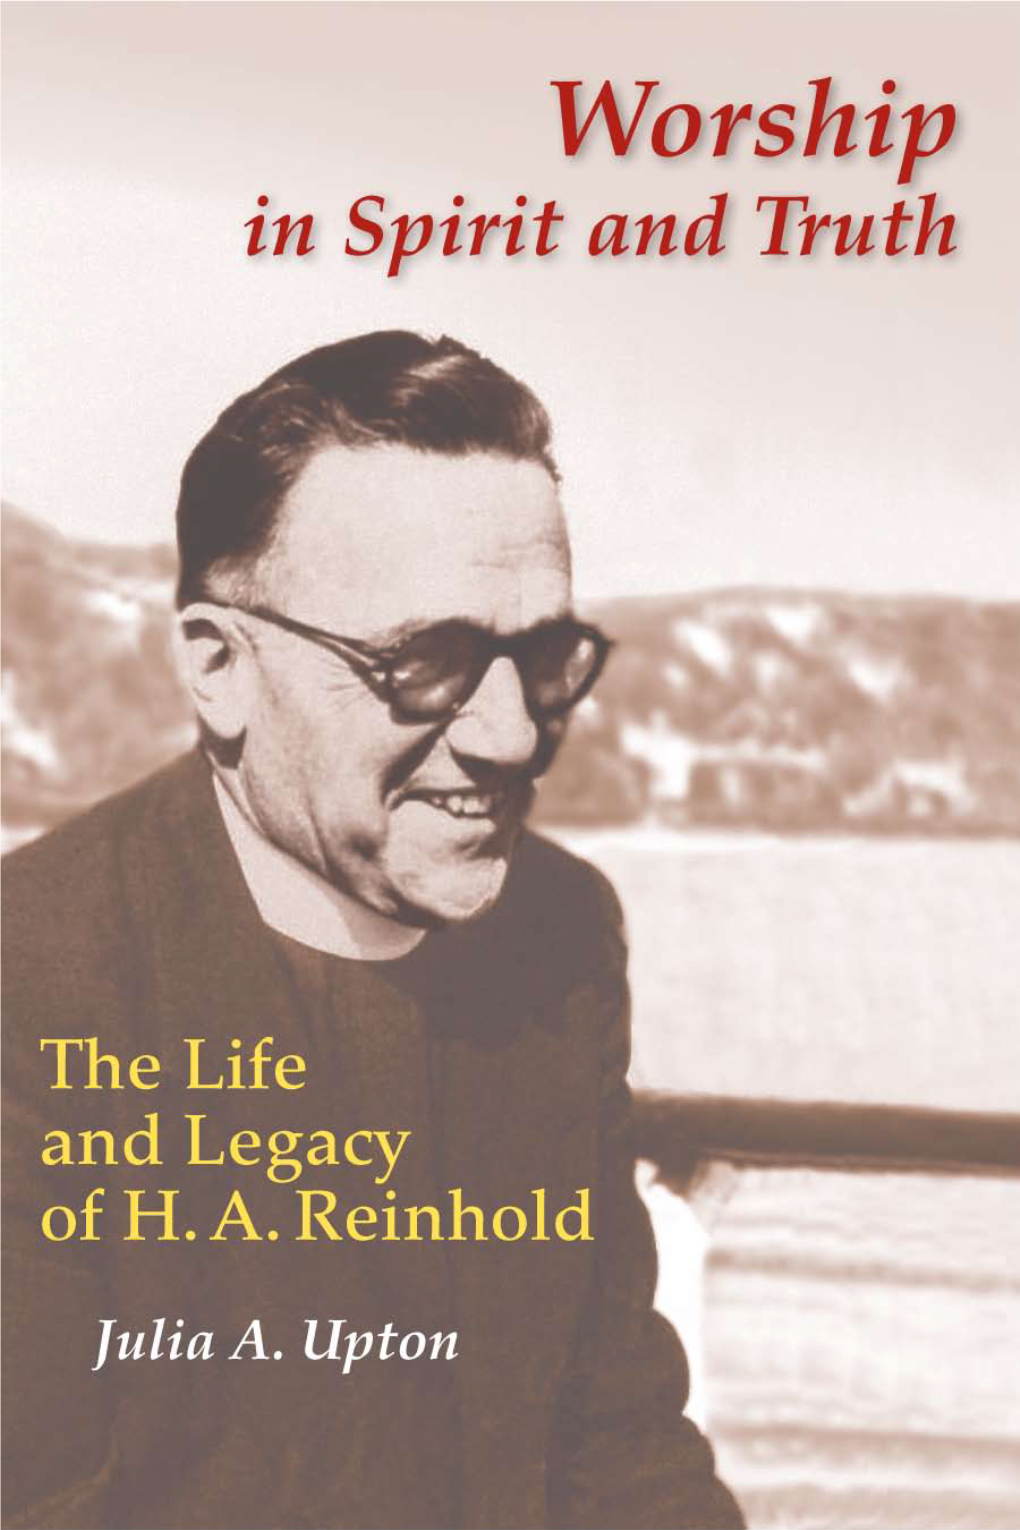 Worship in Spirit and Truth: the Life and Legacy of H. A. Reinhold